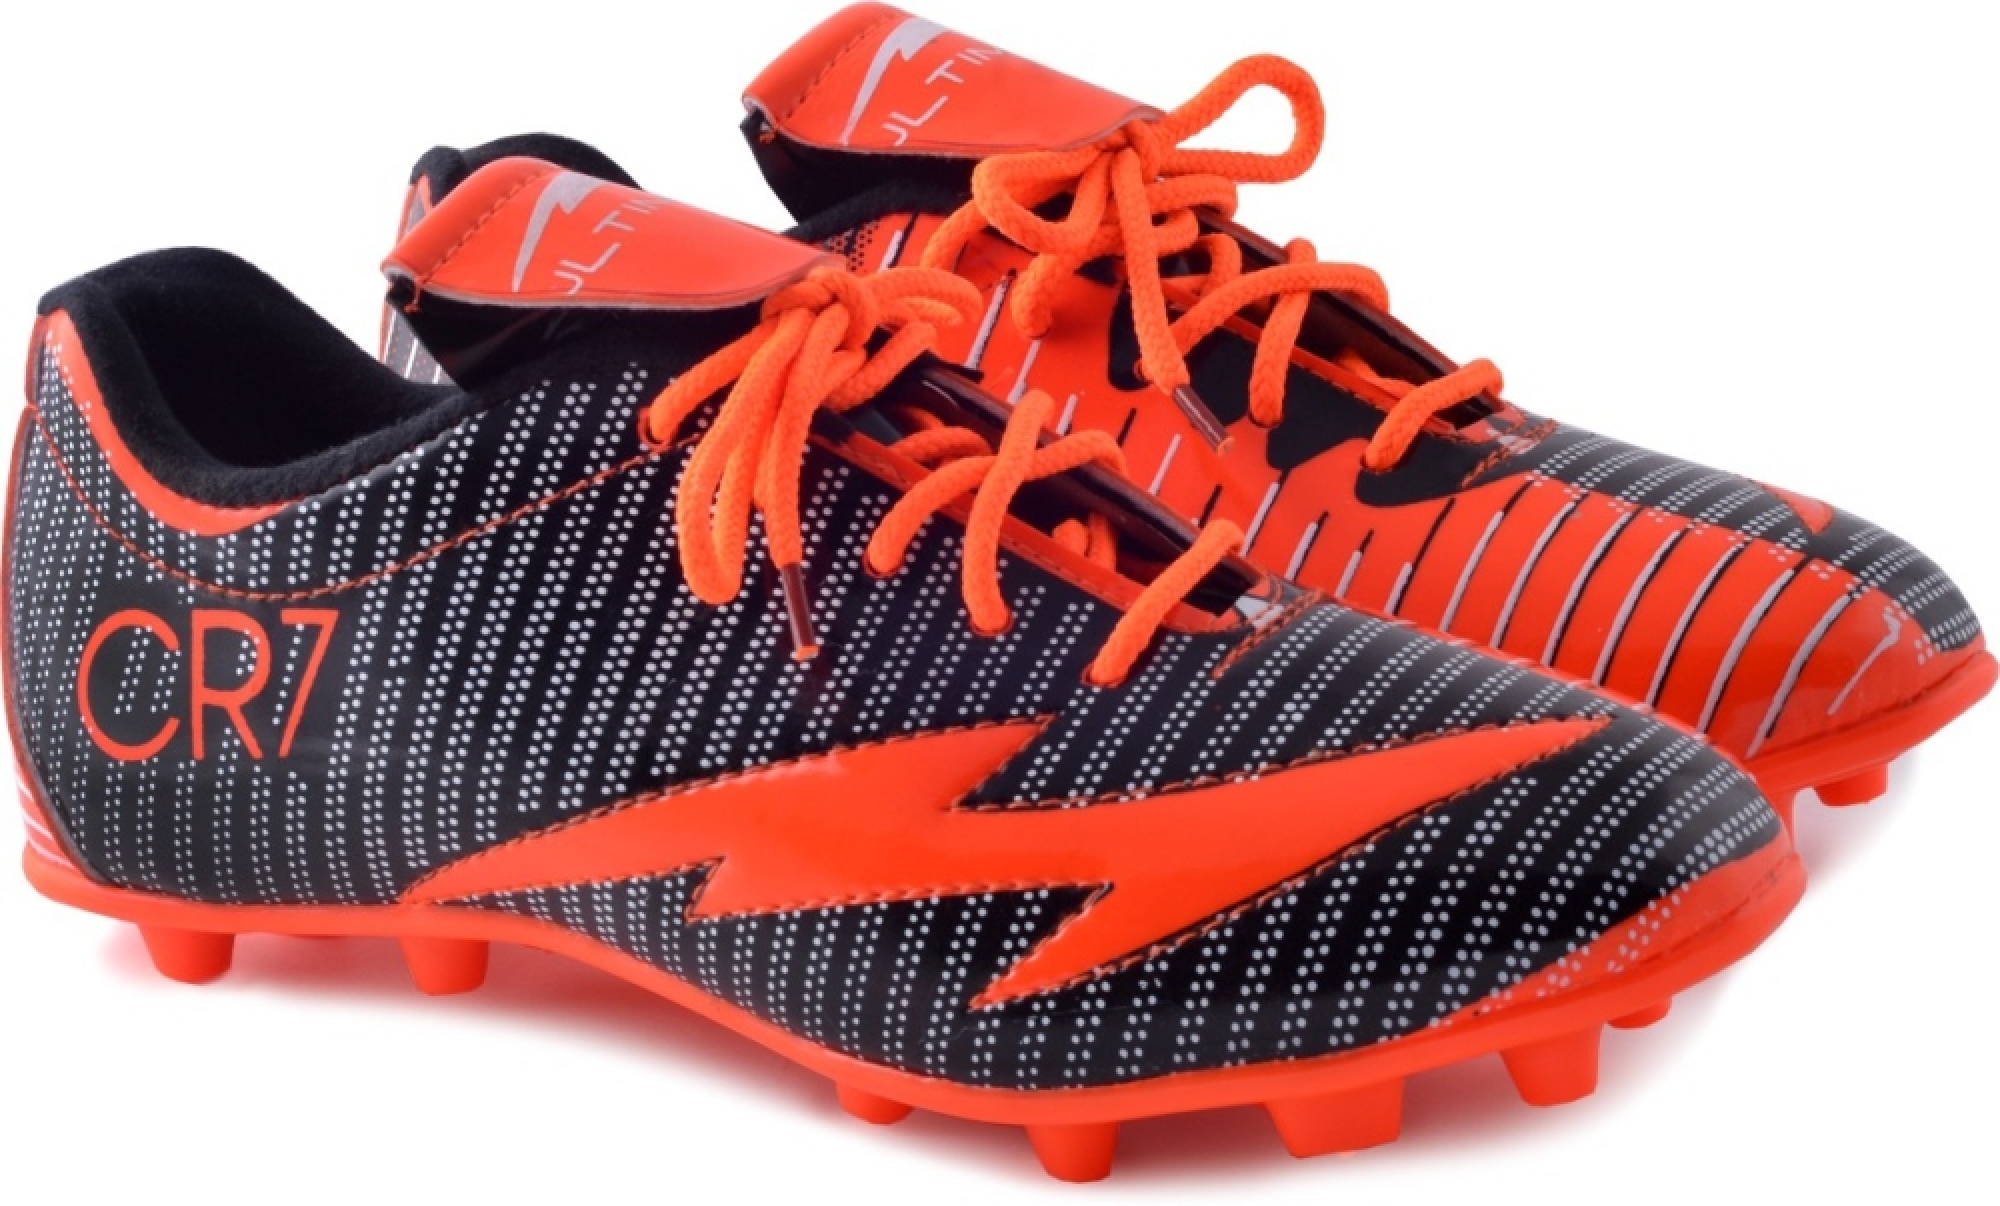 5 best football boots launched ahead of Qatar Fifa World Cup 2022